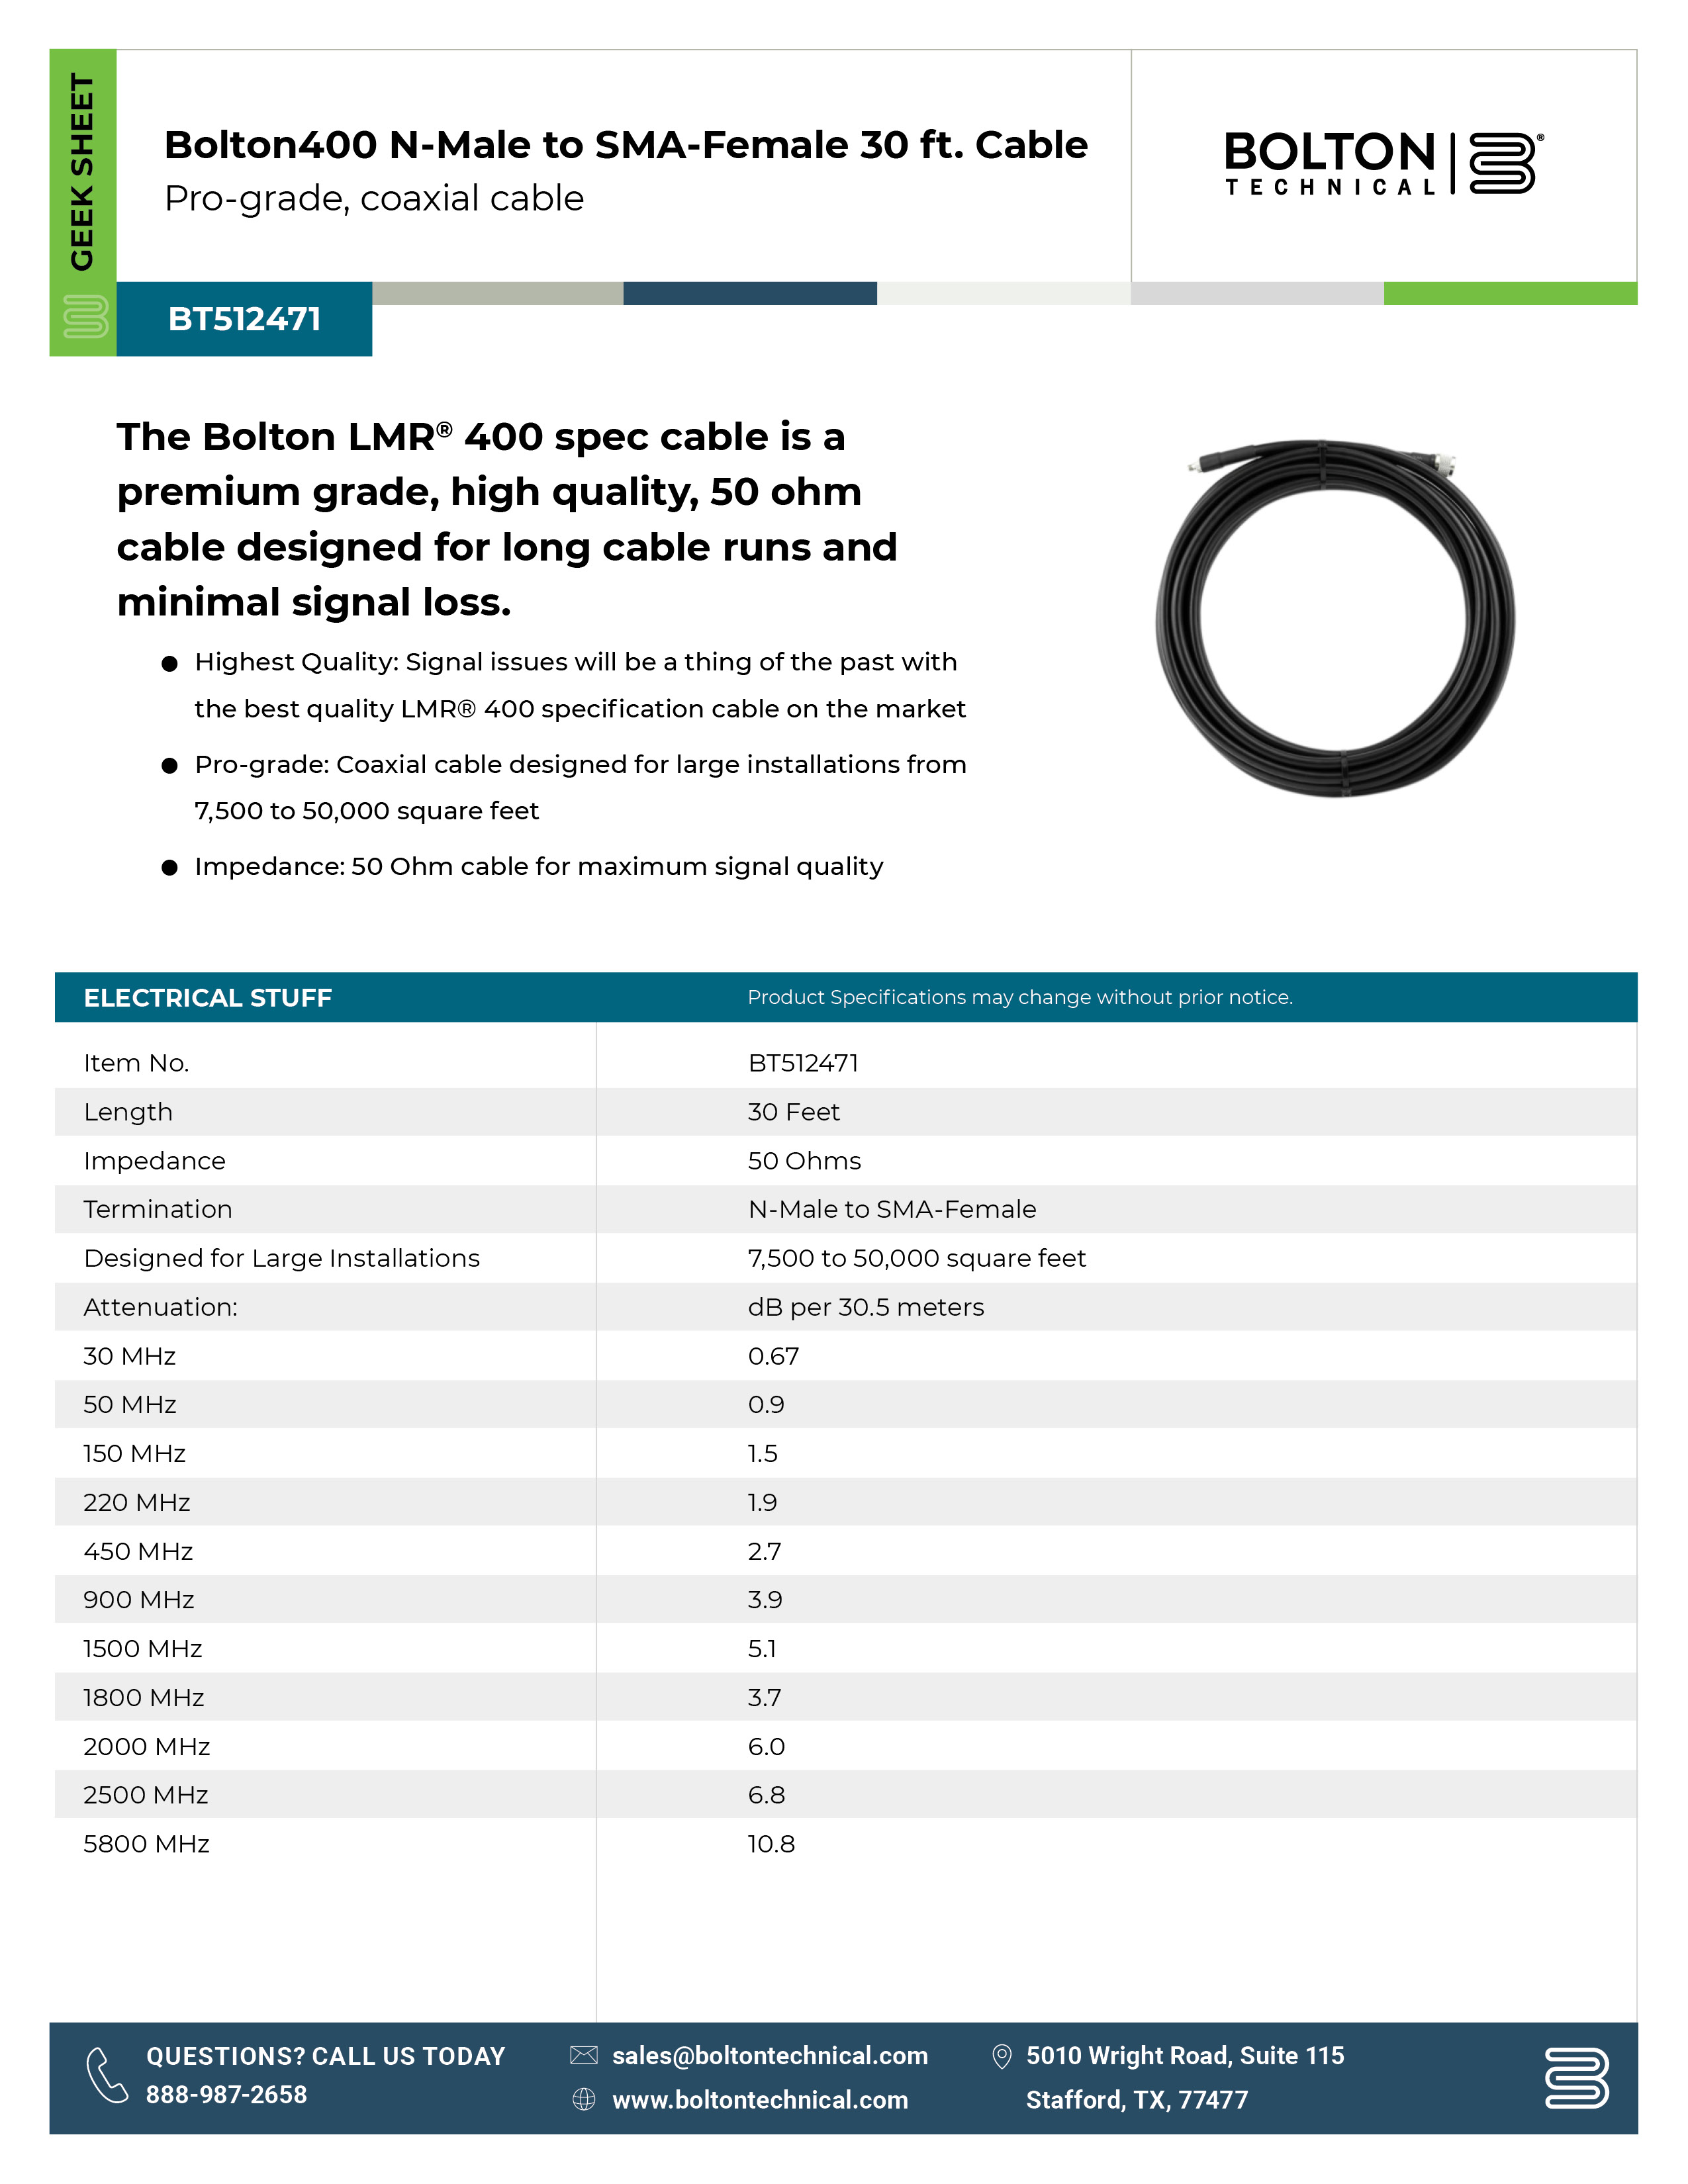 Bolton 25ft cable spec sheet